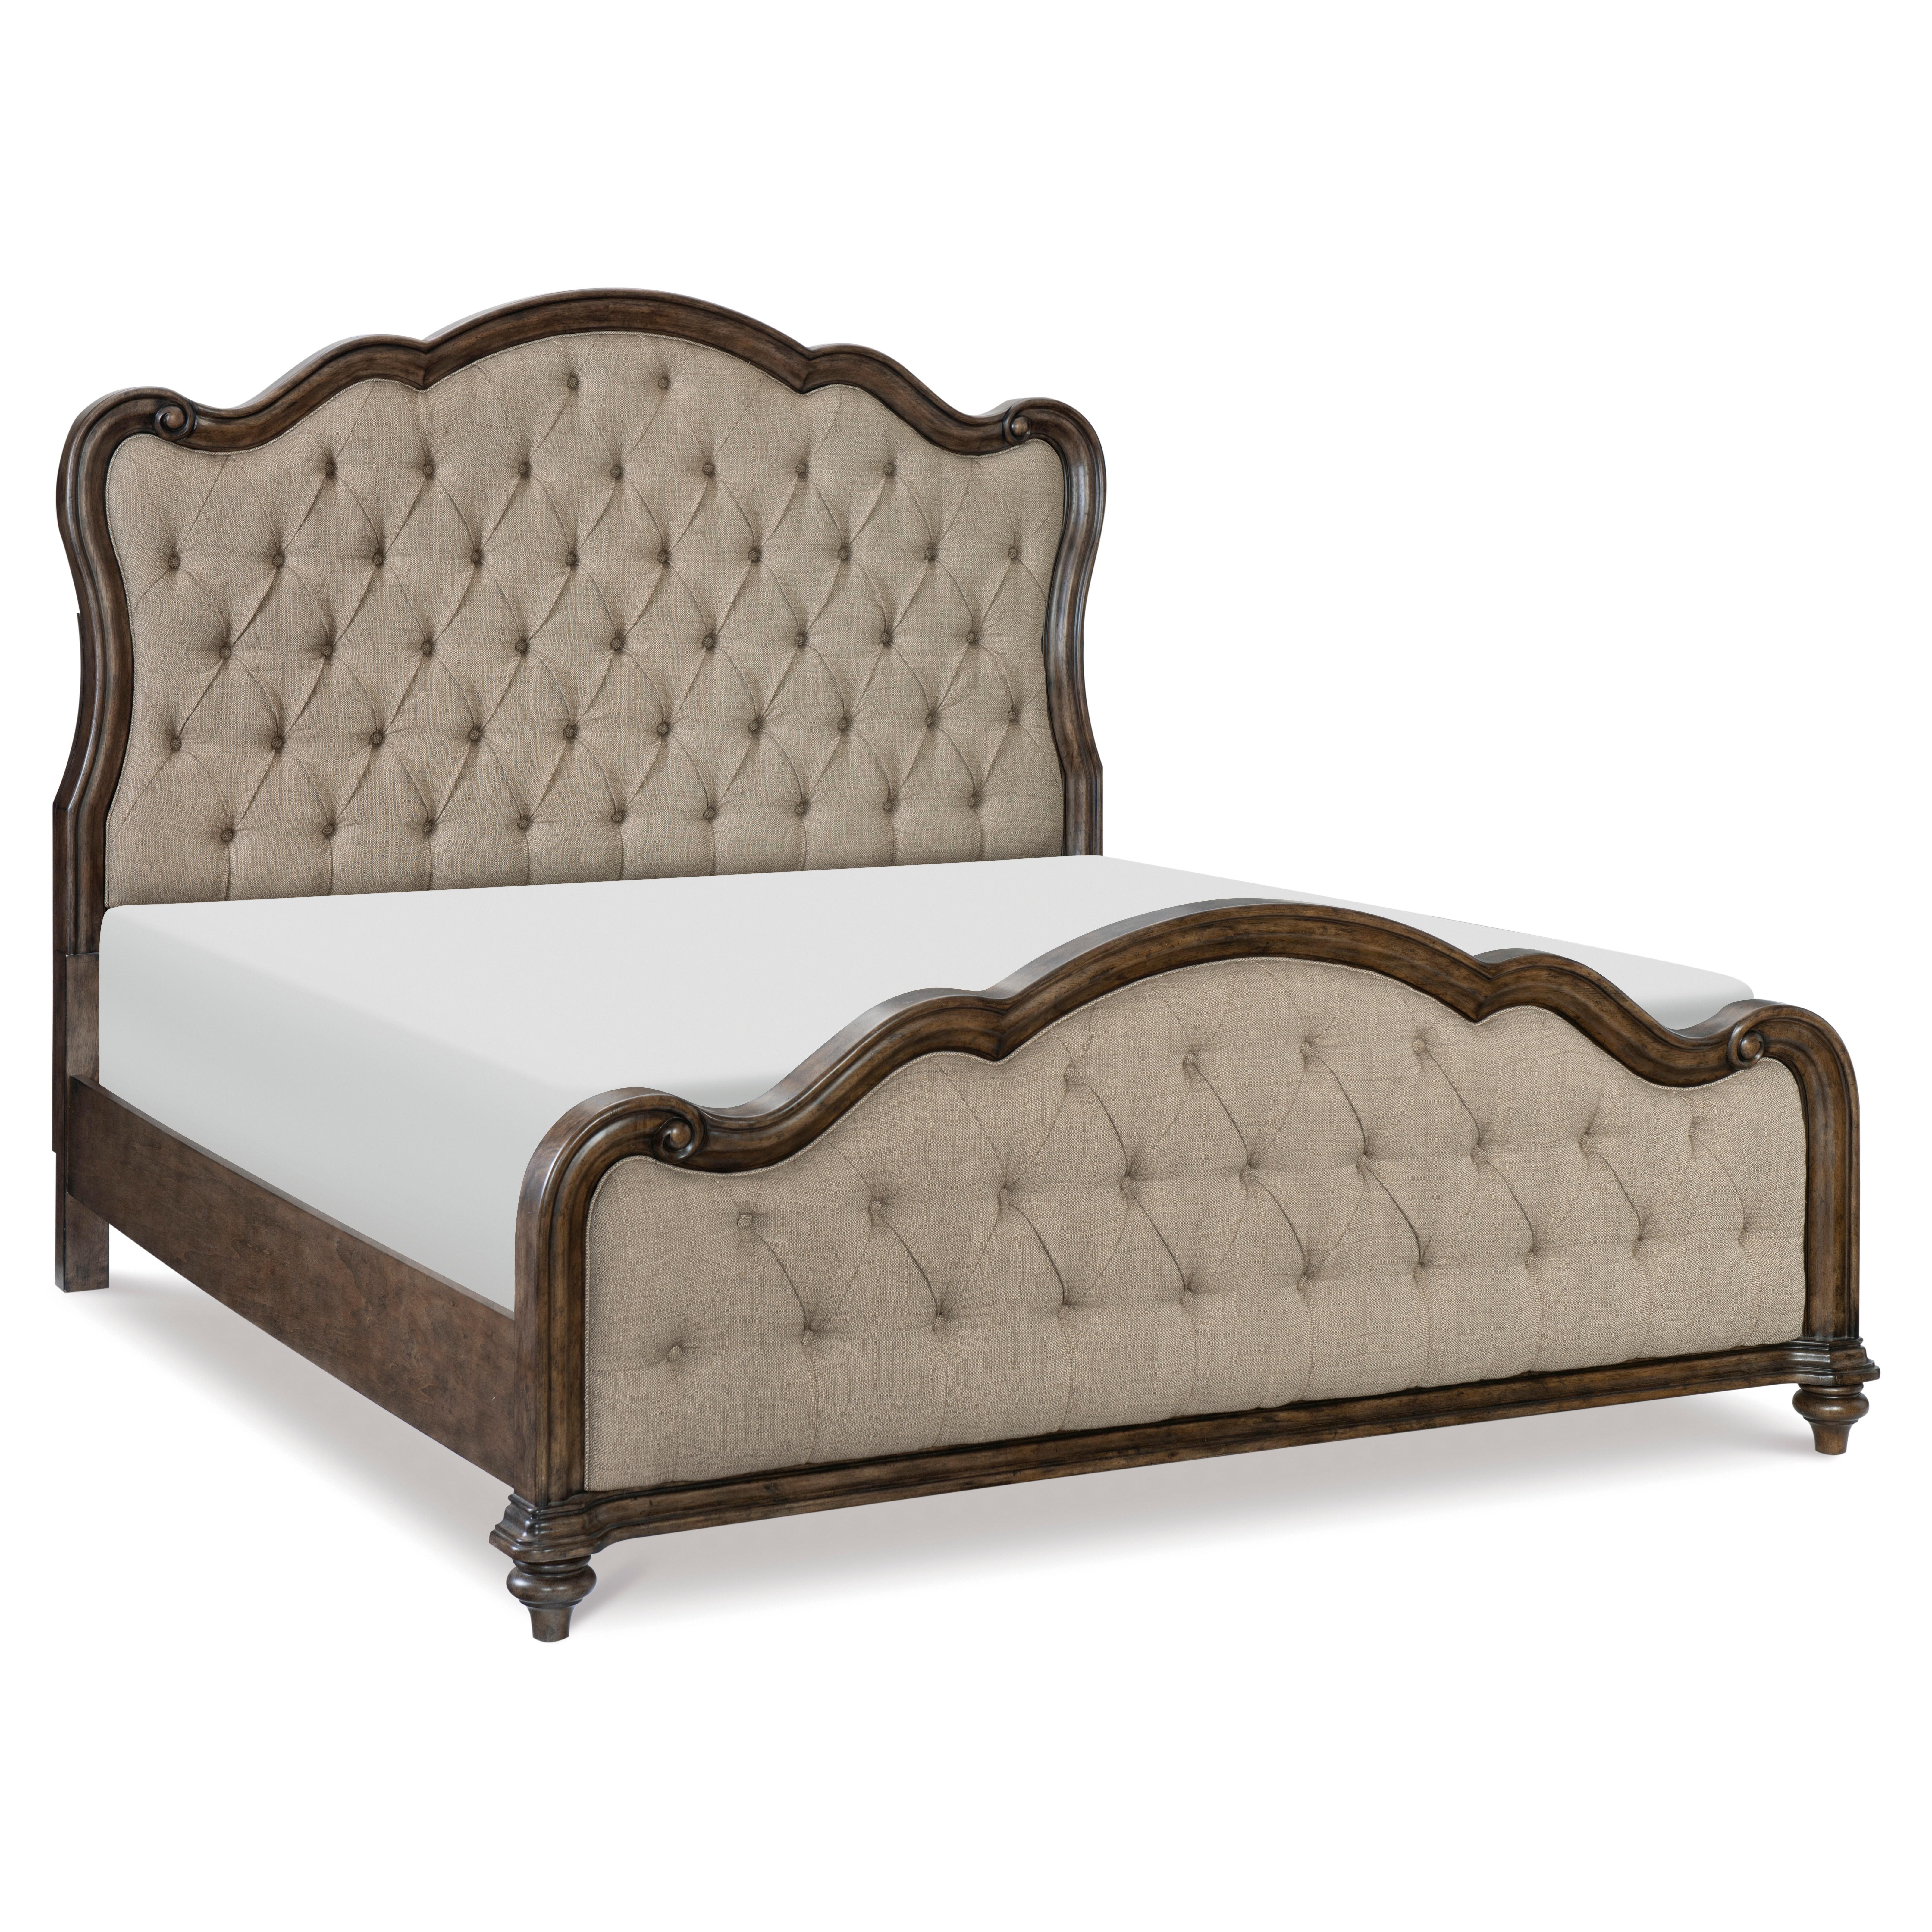 Traditional Bed 1682K-1CK* Heath Court 1682K-1CK* in Brown Oak Polyester